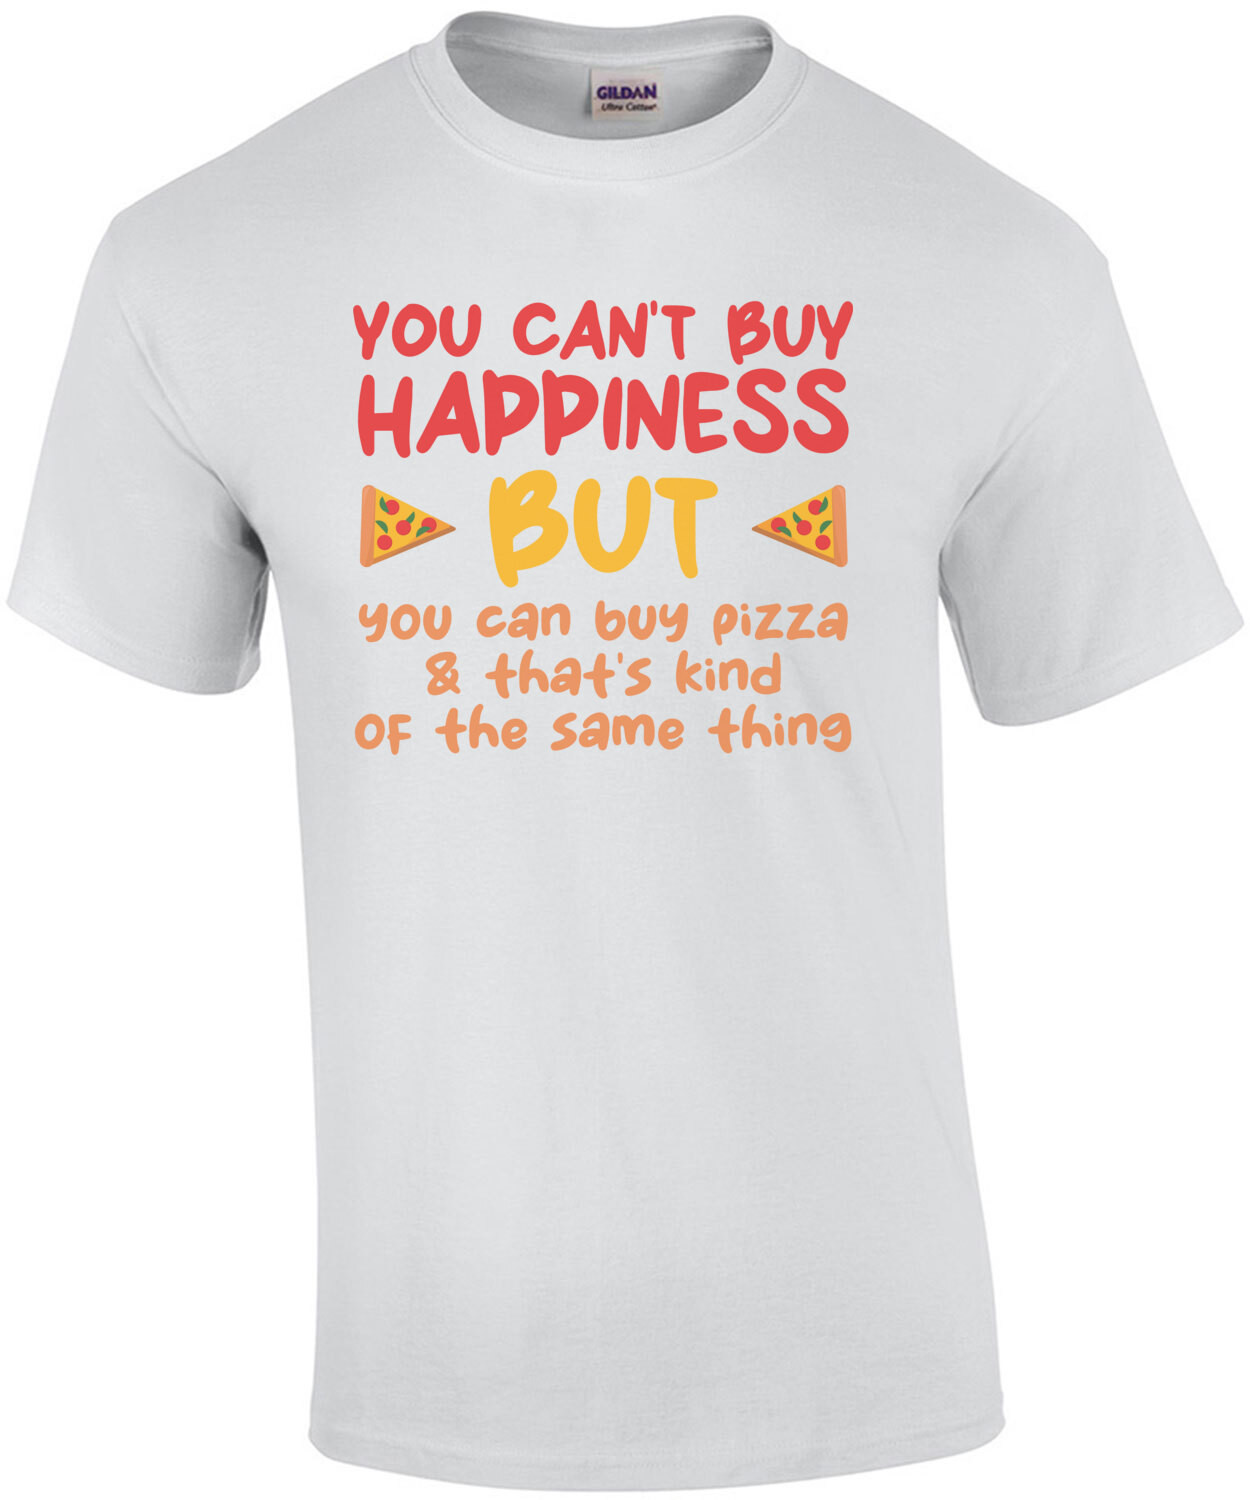 You can't buy happiness but you can buy pizza and that's kind of the same thing. Funny pizza t-shirt